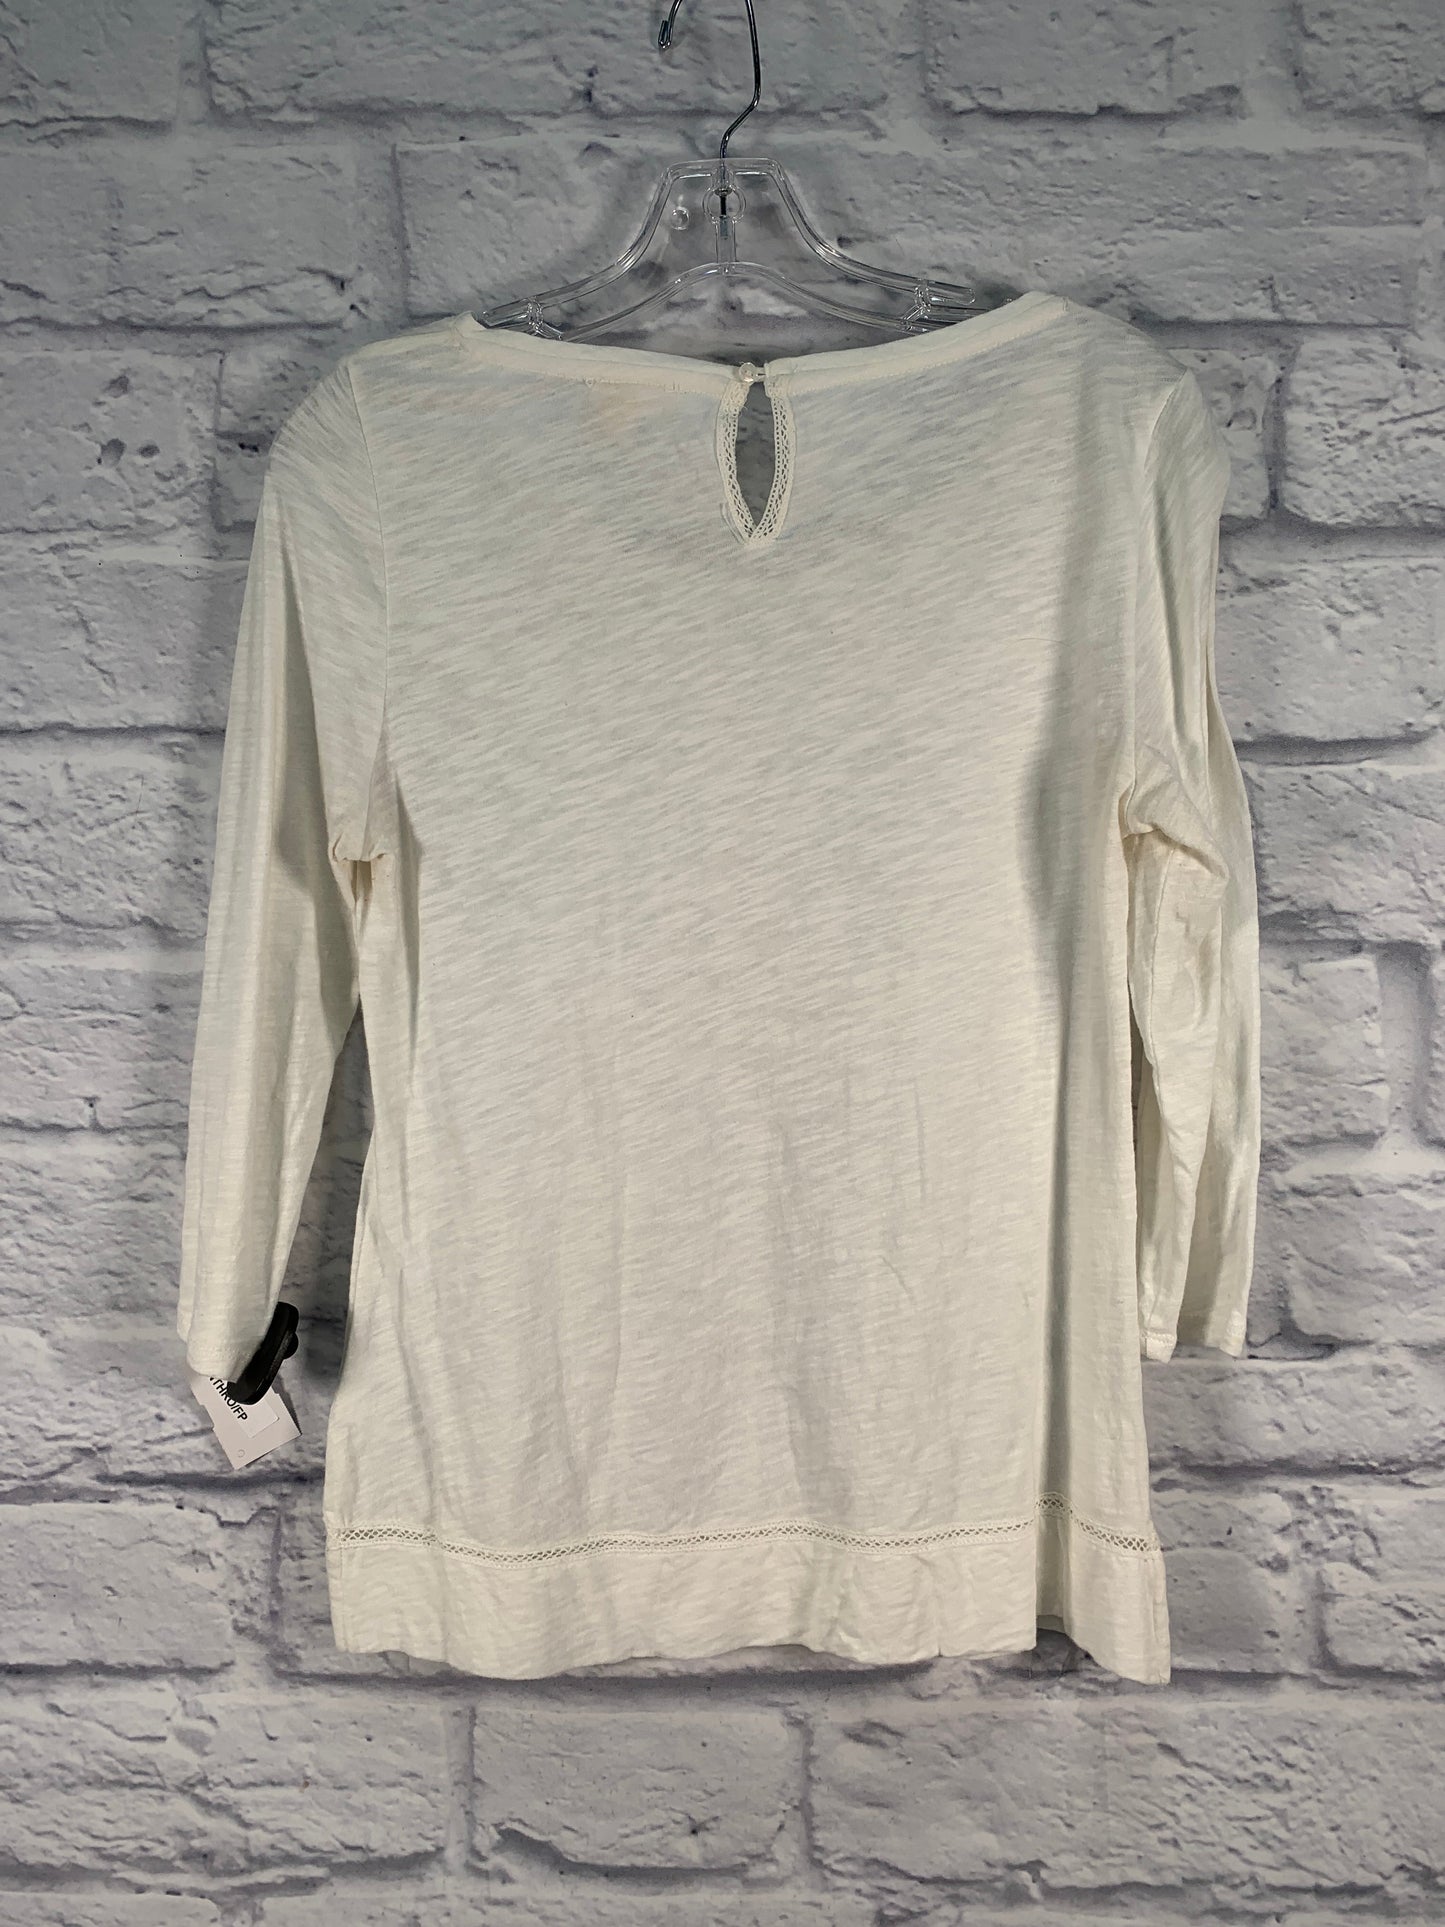 White Top 3/4 Sleeve Meadow Rue, Size S